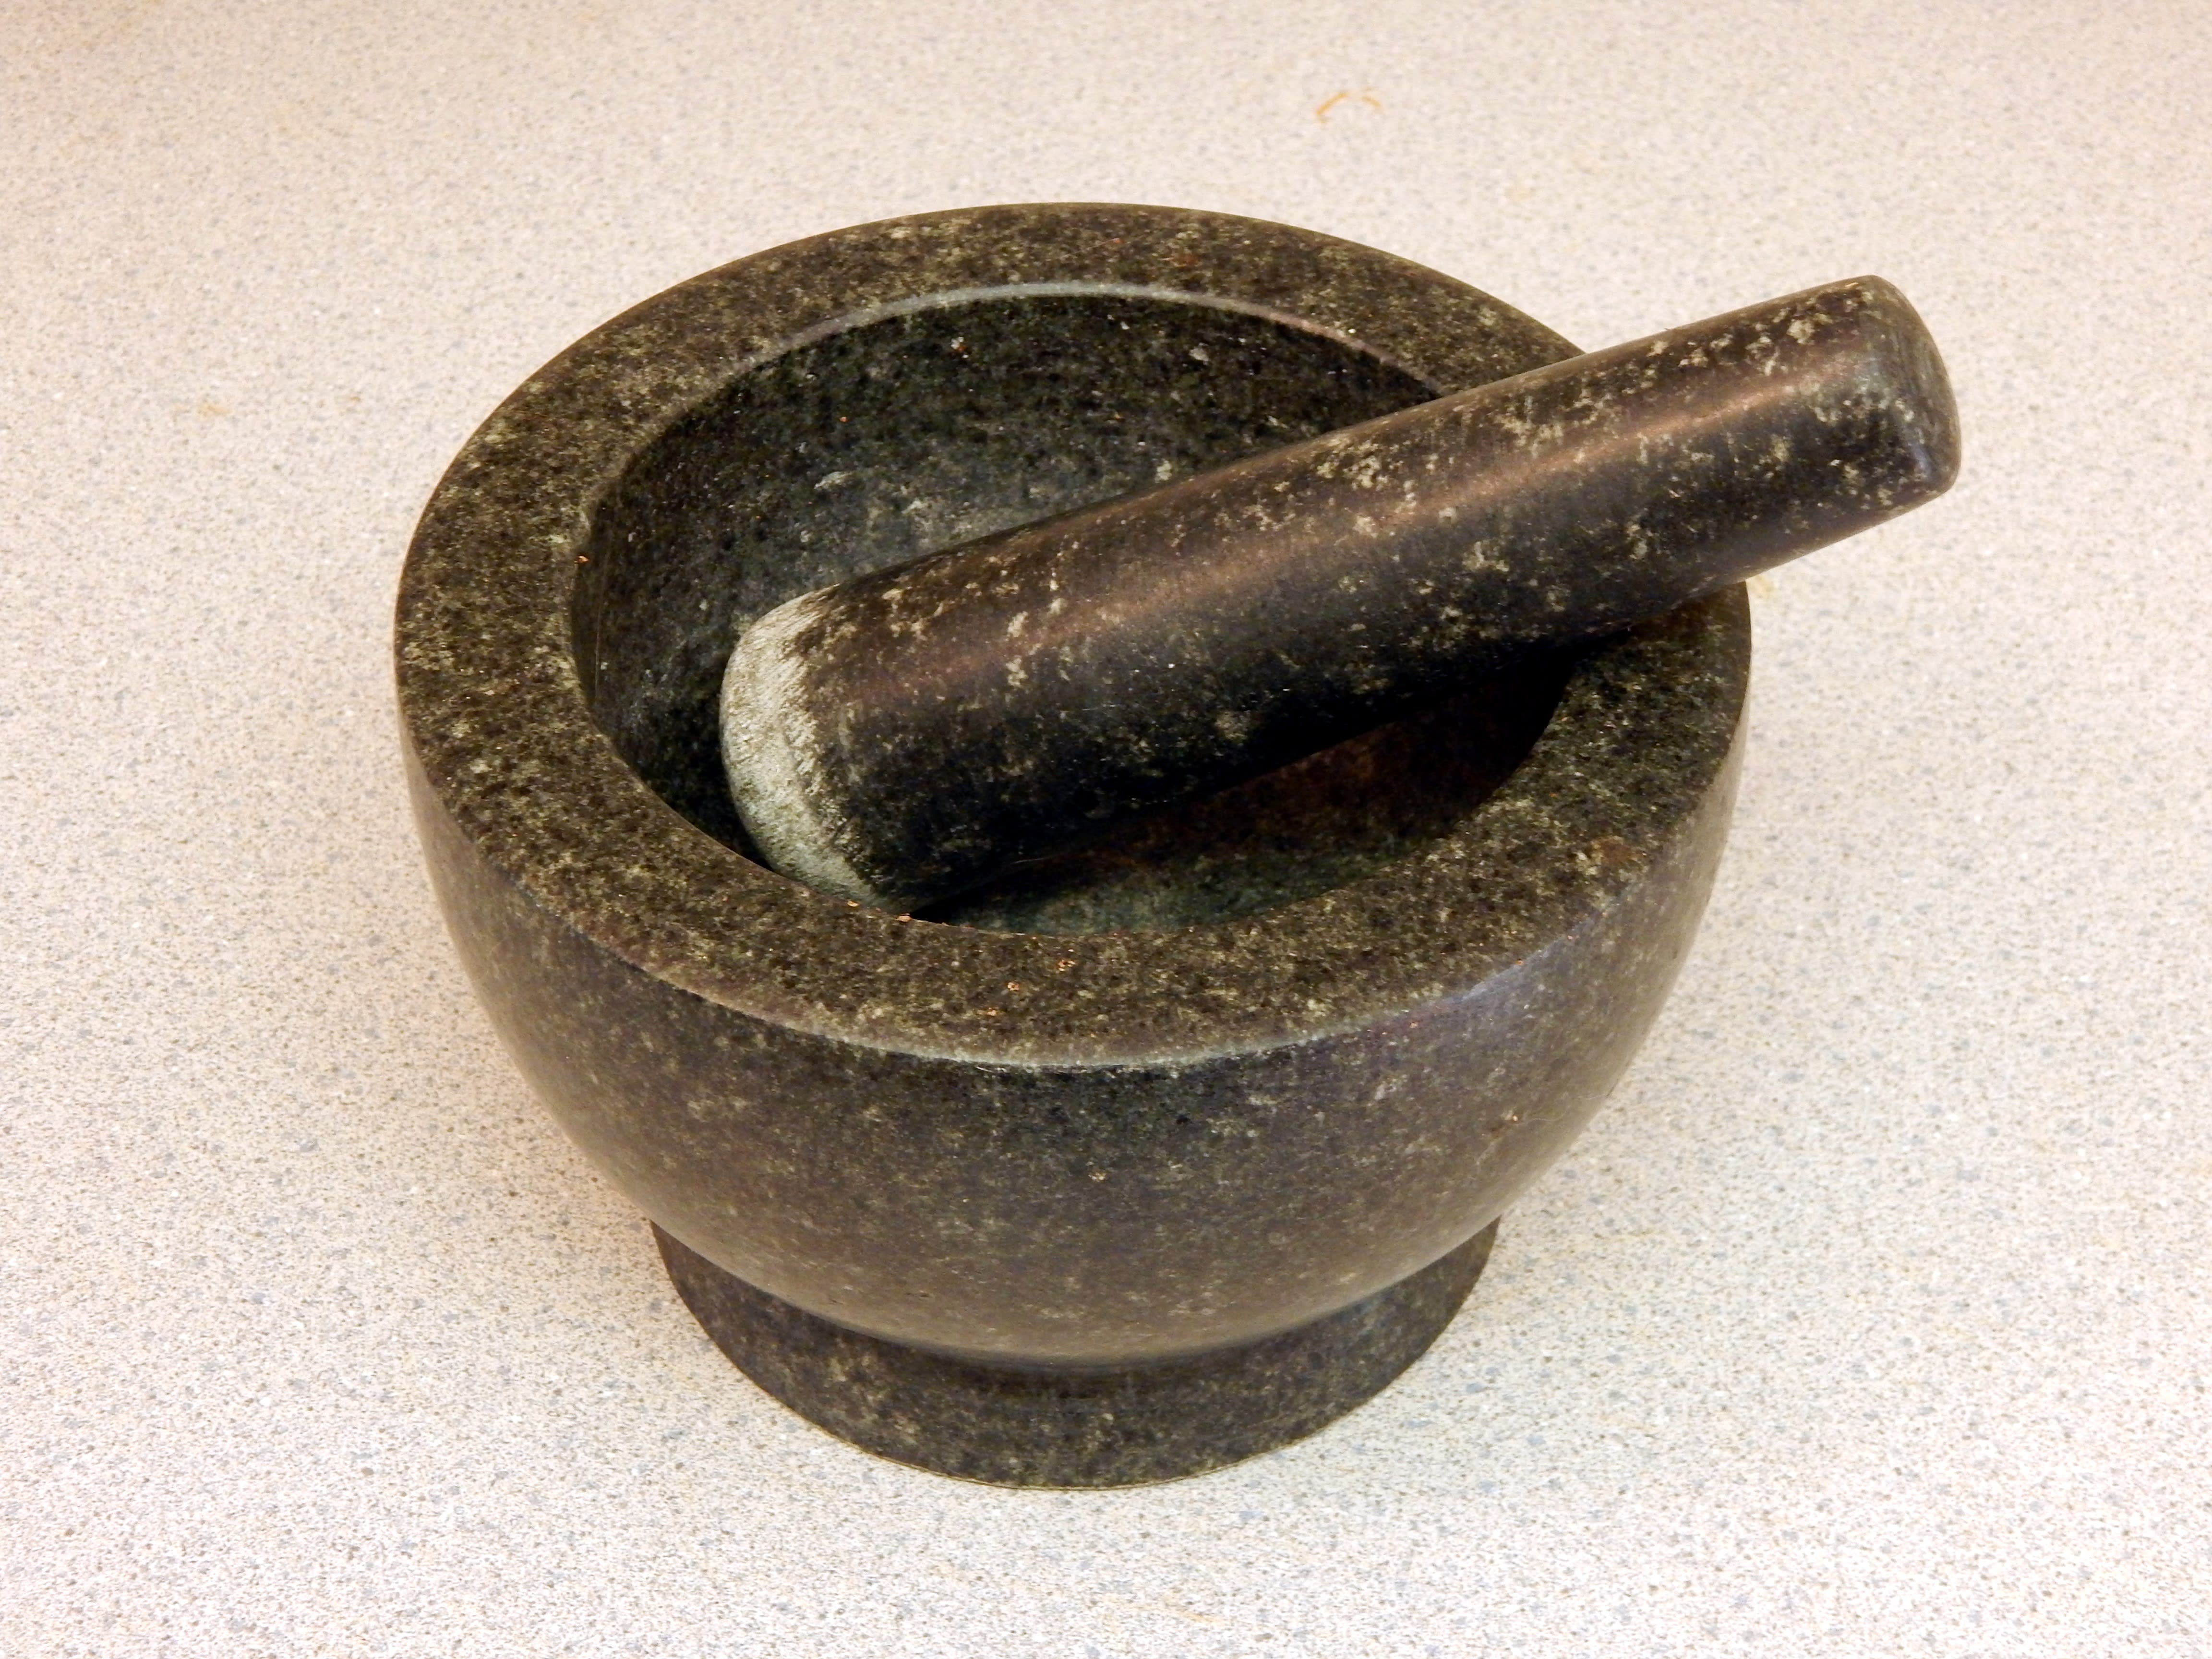 A picture of a mortar and pestle. Moni Lal Chan used a stone pestle to hit his dormitory mate after an argument.